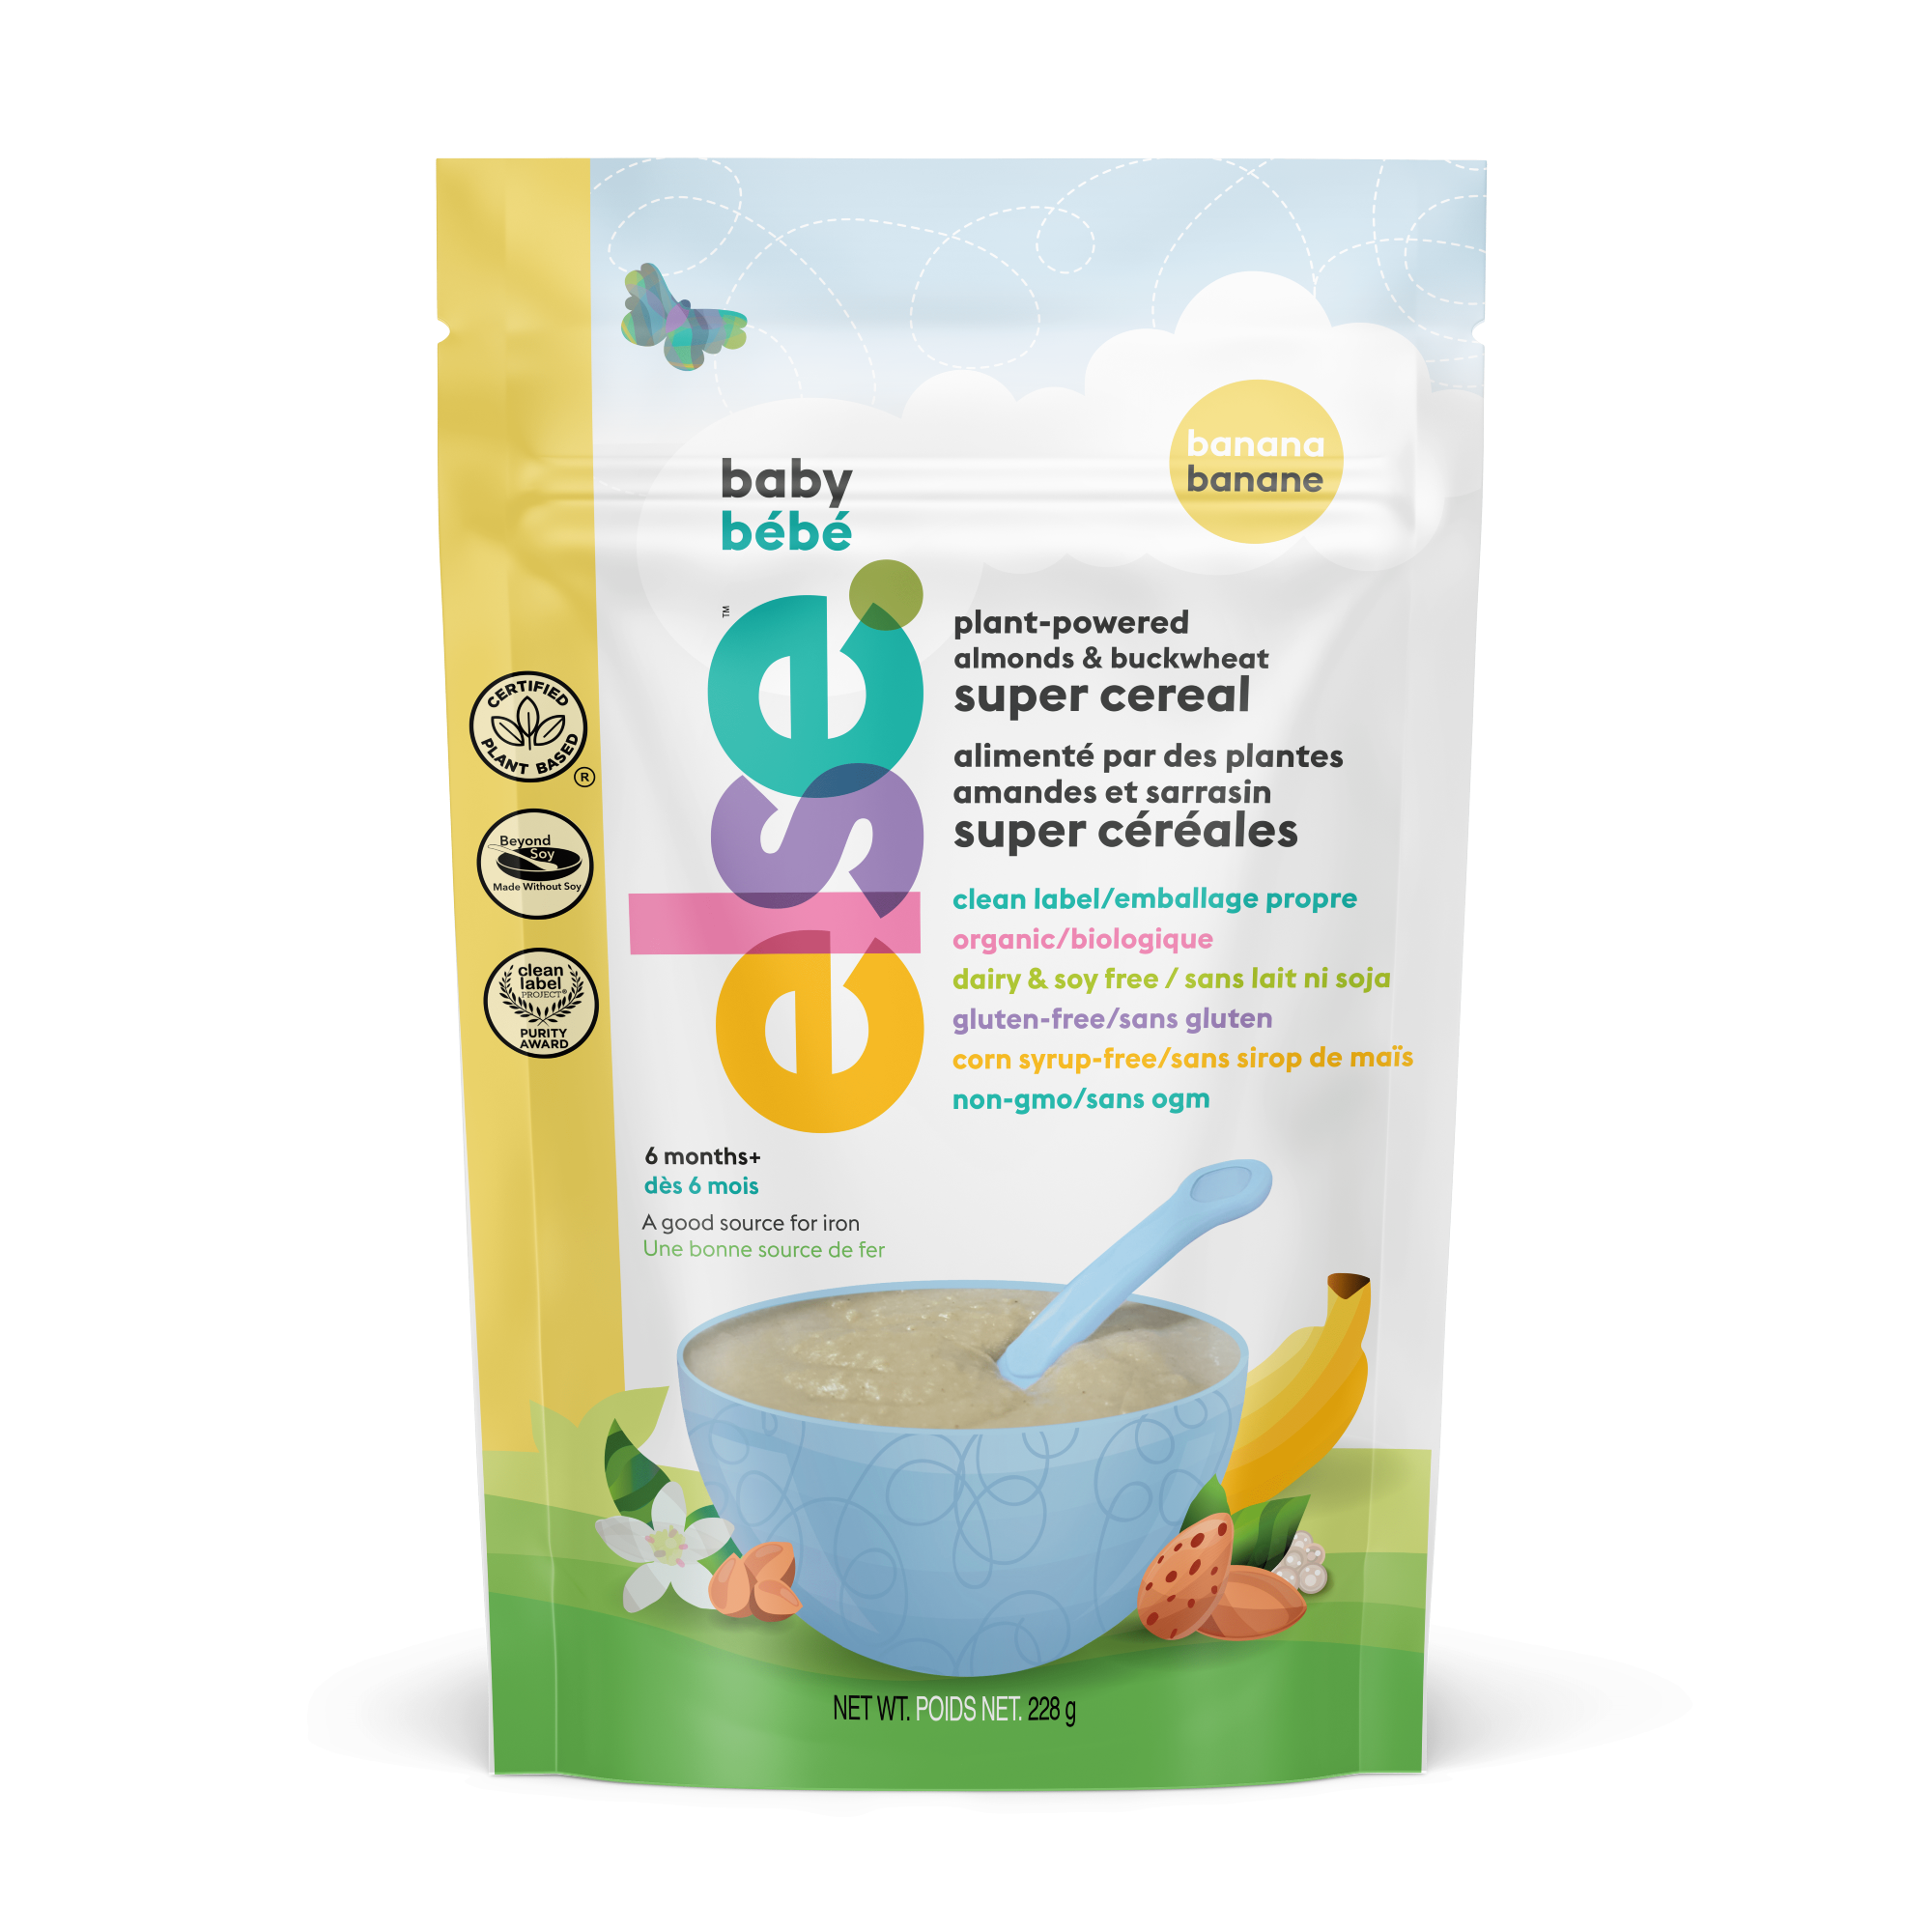 Clean Label Certified Baby Cereals - Safe from Heavy Metals. 6+ Months - Banana